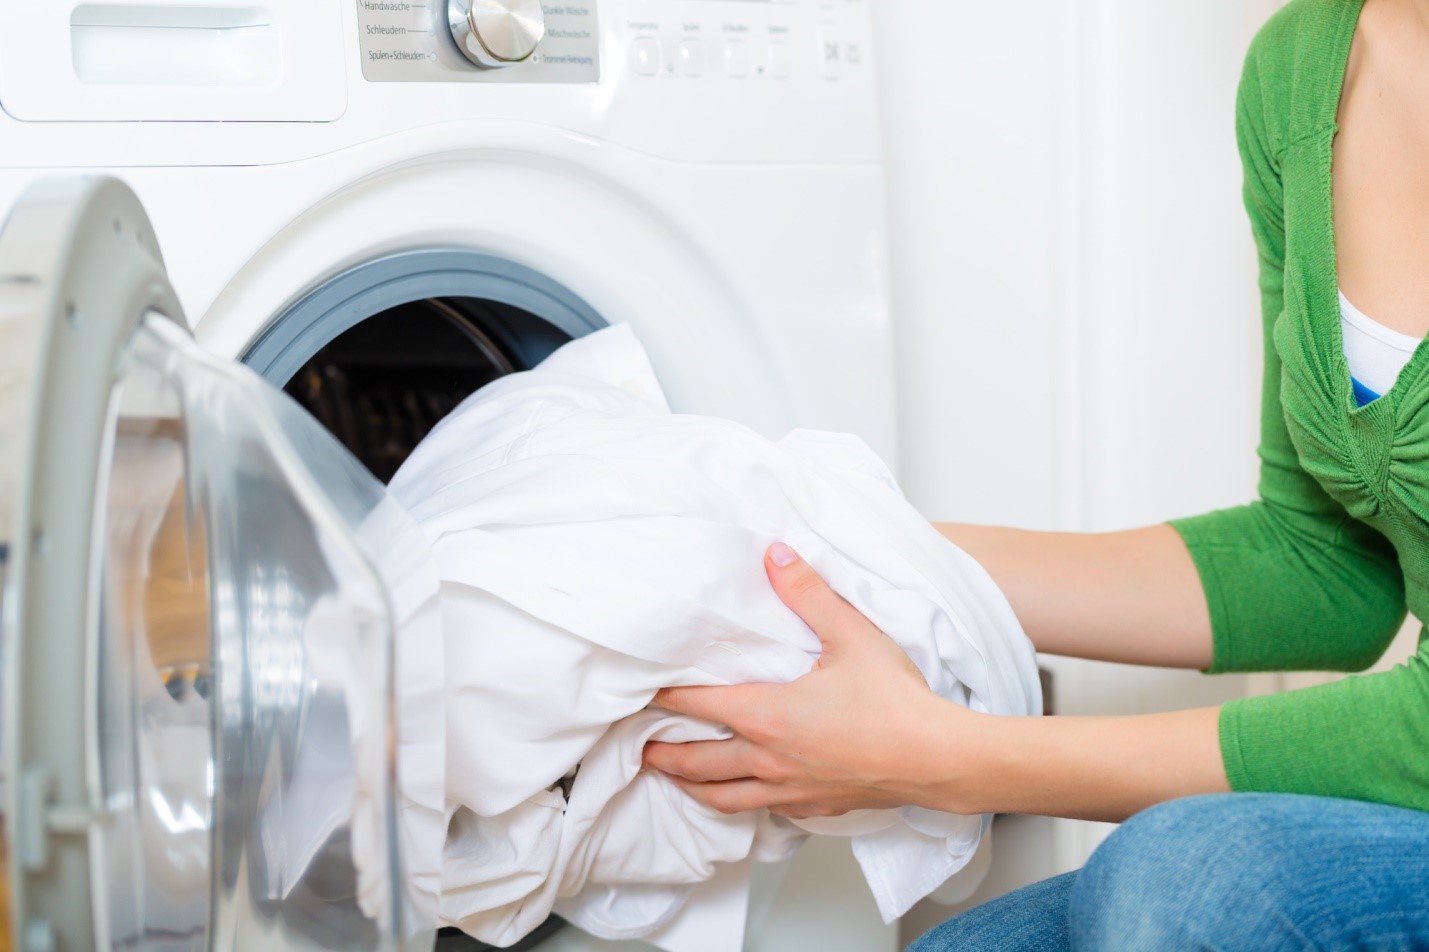 Tips That Will Make Laundry Day a Breeze